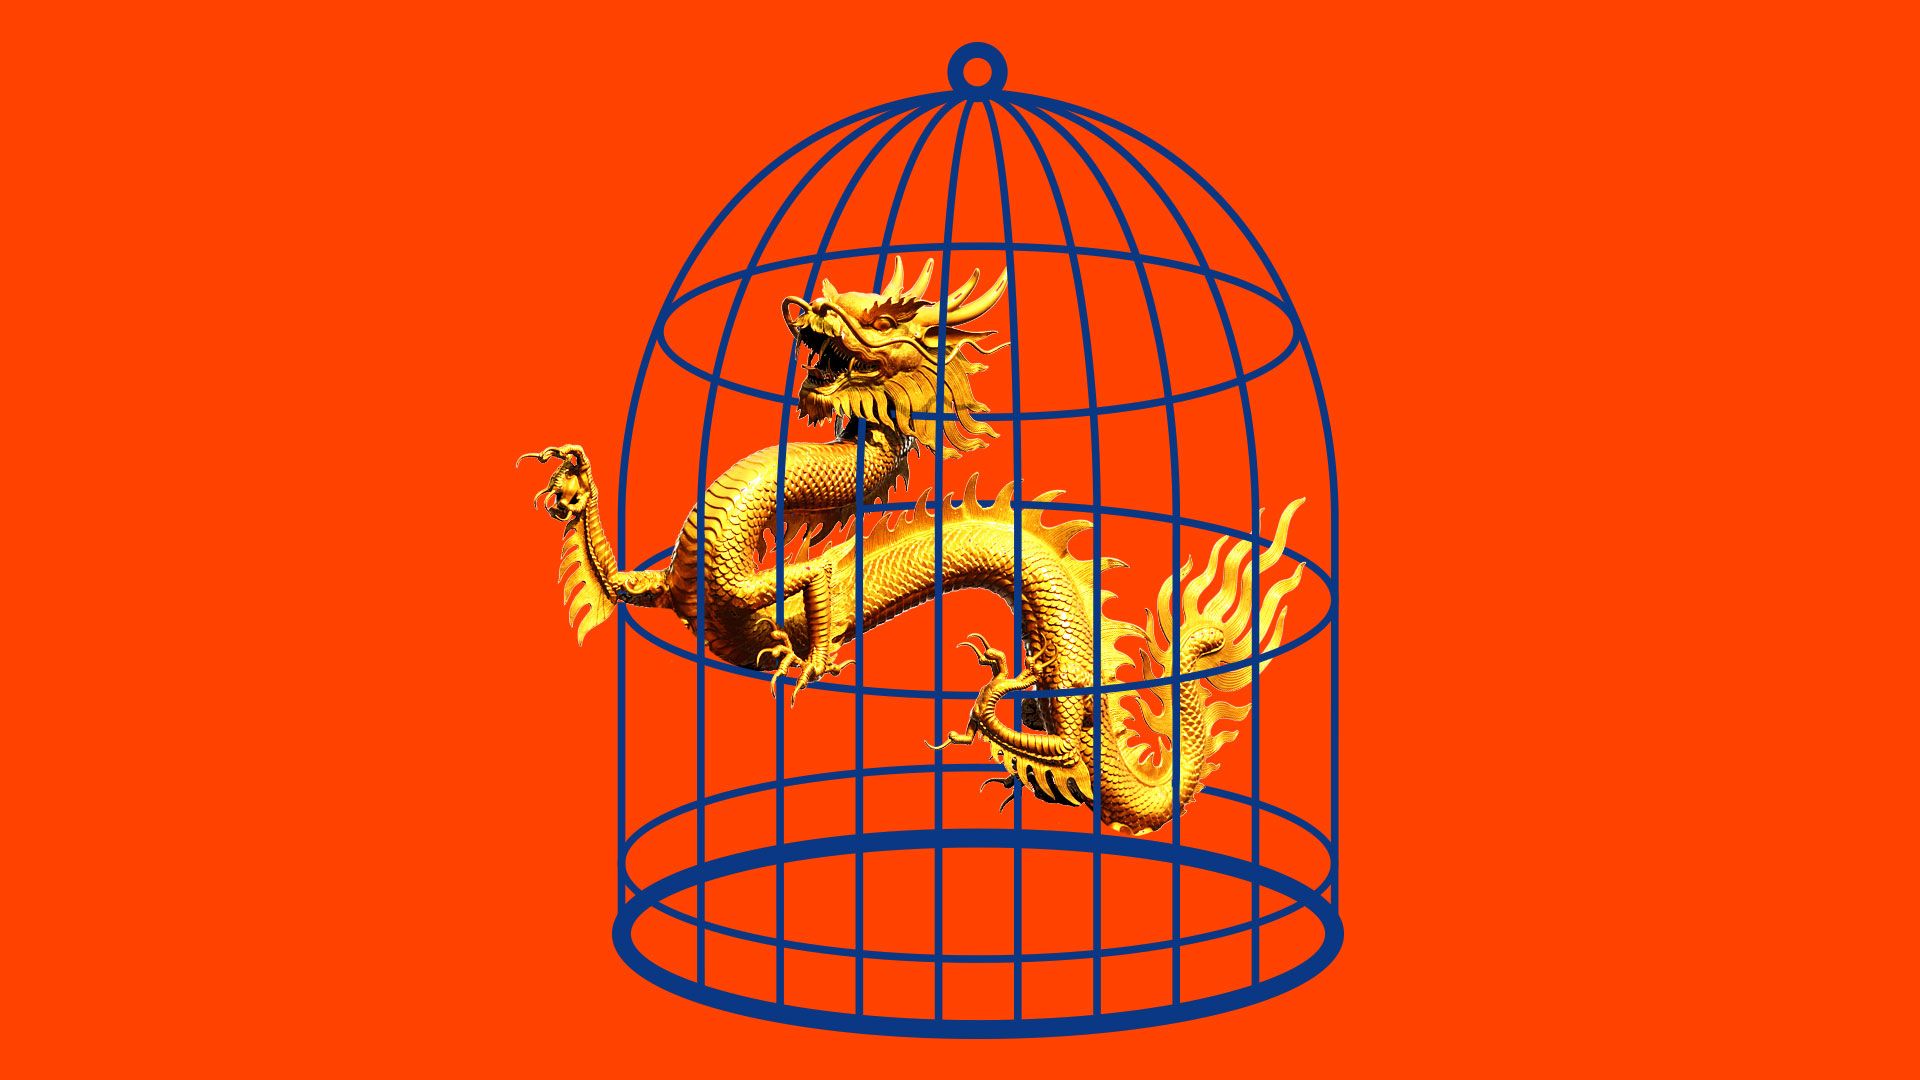 Illustration of Chinese dragon in birdcage